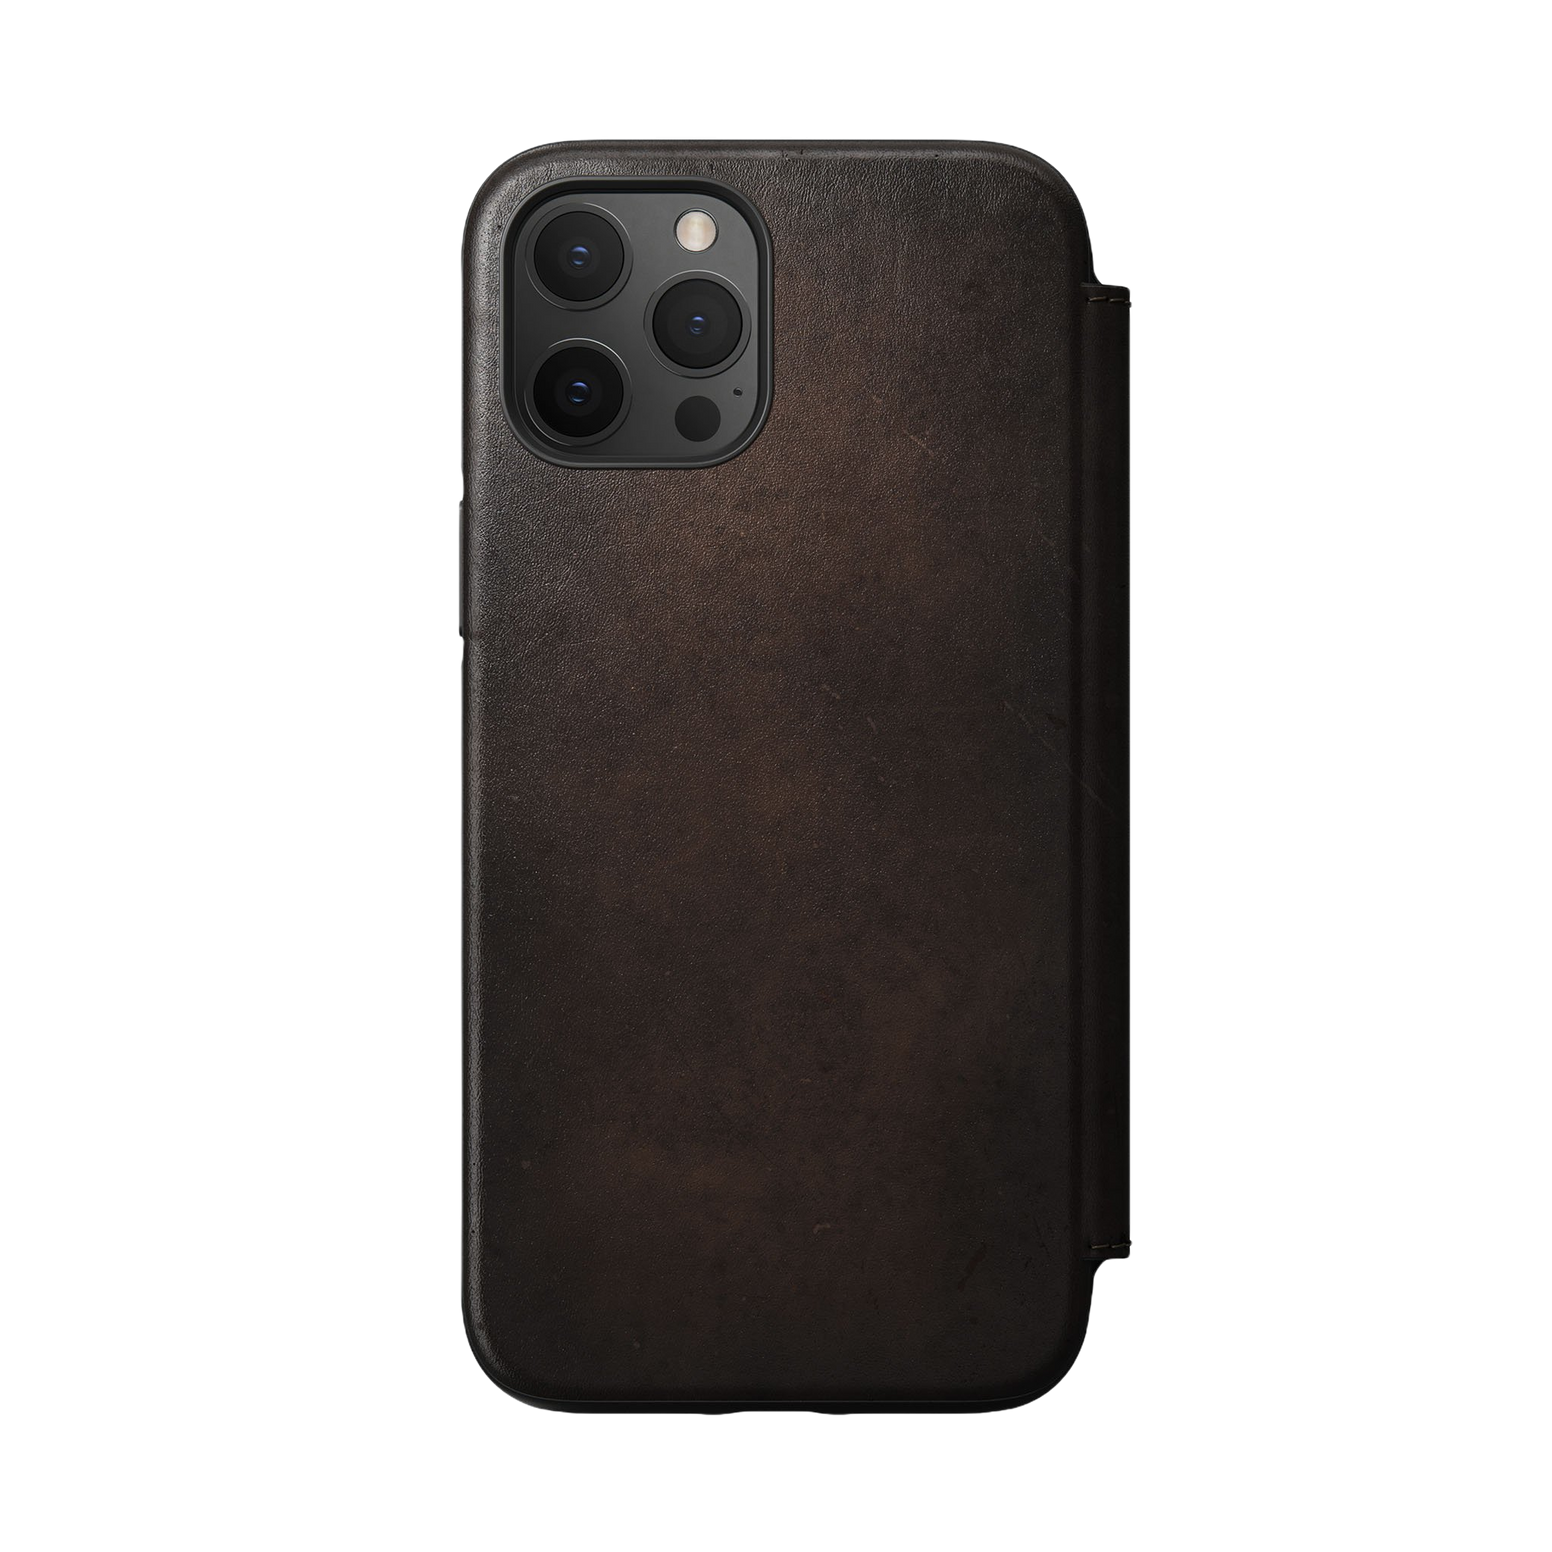 Nomad Rugged Folio with Horween Leather for iPhone 12 Pro Max (6.7") - Rustic Brown - Discontinued